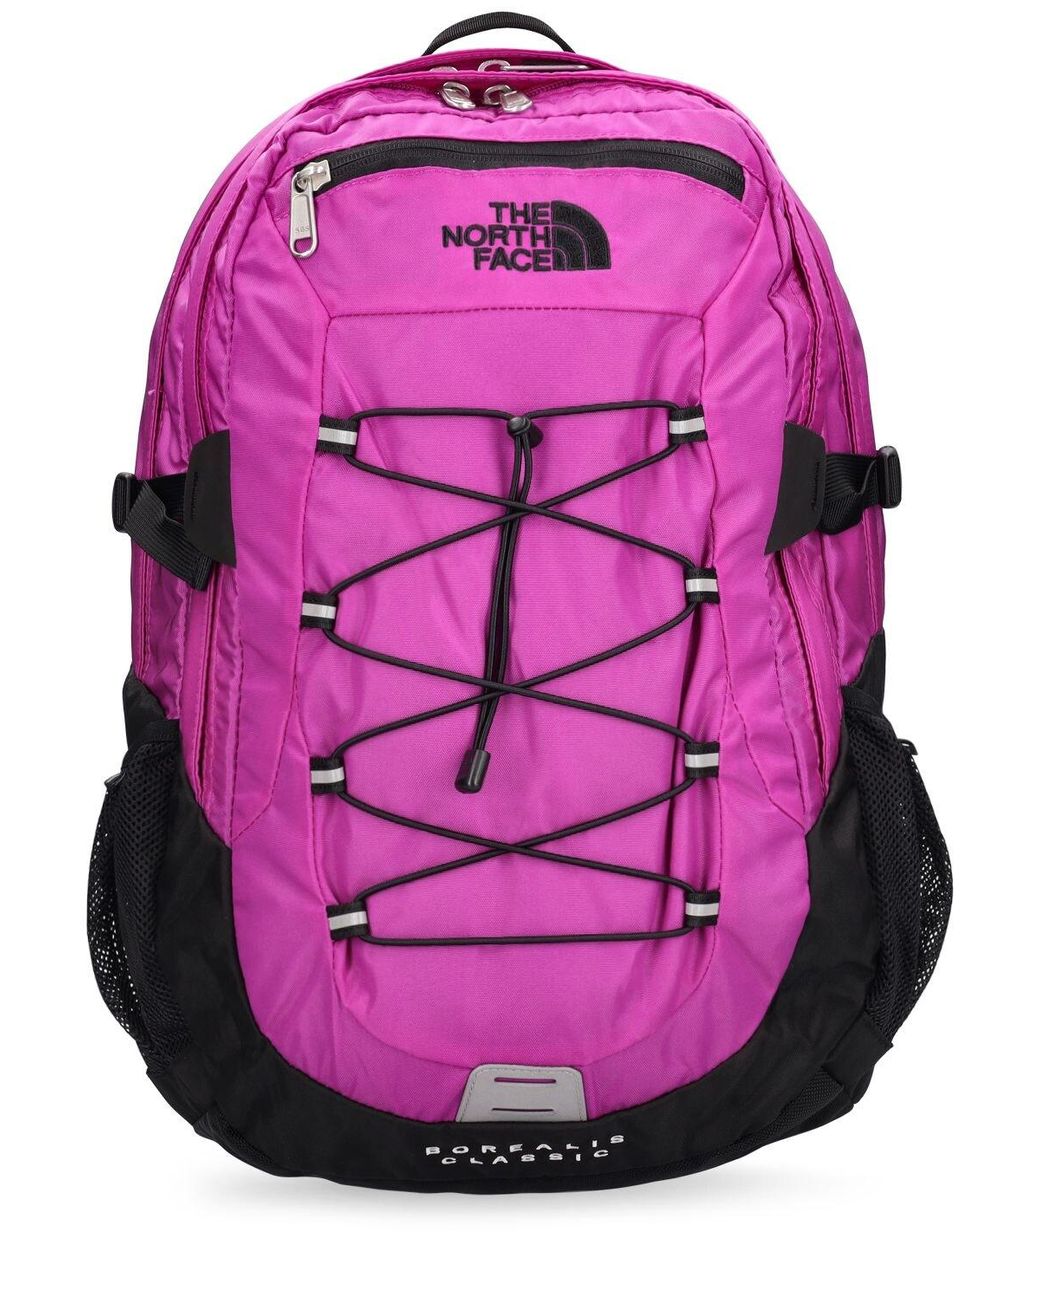 The North Face 29l Borealis Classic Nylon Backpack in Pink | Lyst Australia